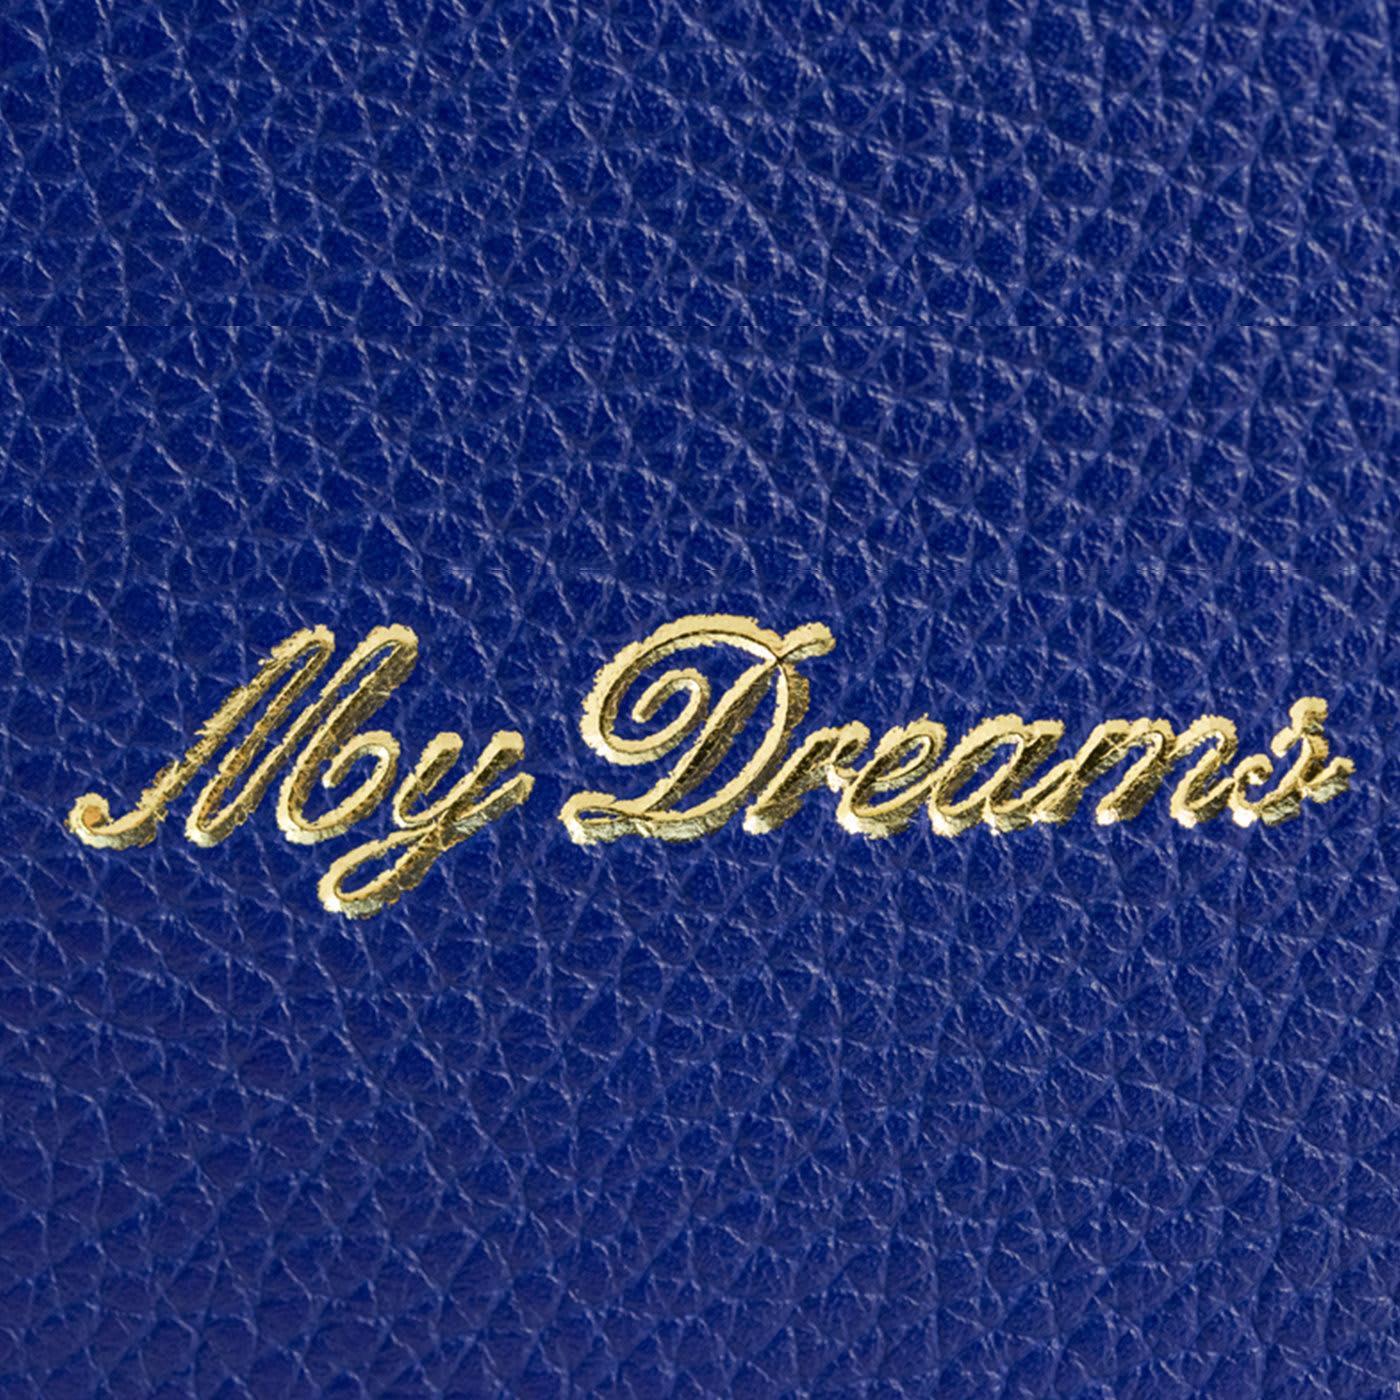 Keep a record of all your nocturnal visions with this fanciful dream journal. Its soft, naturally tanned, full-grain leather cover is in a deep shade of celestial blue. It features the word My Dreams and a moon and stars motif in eye-catching gold.